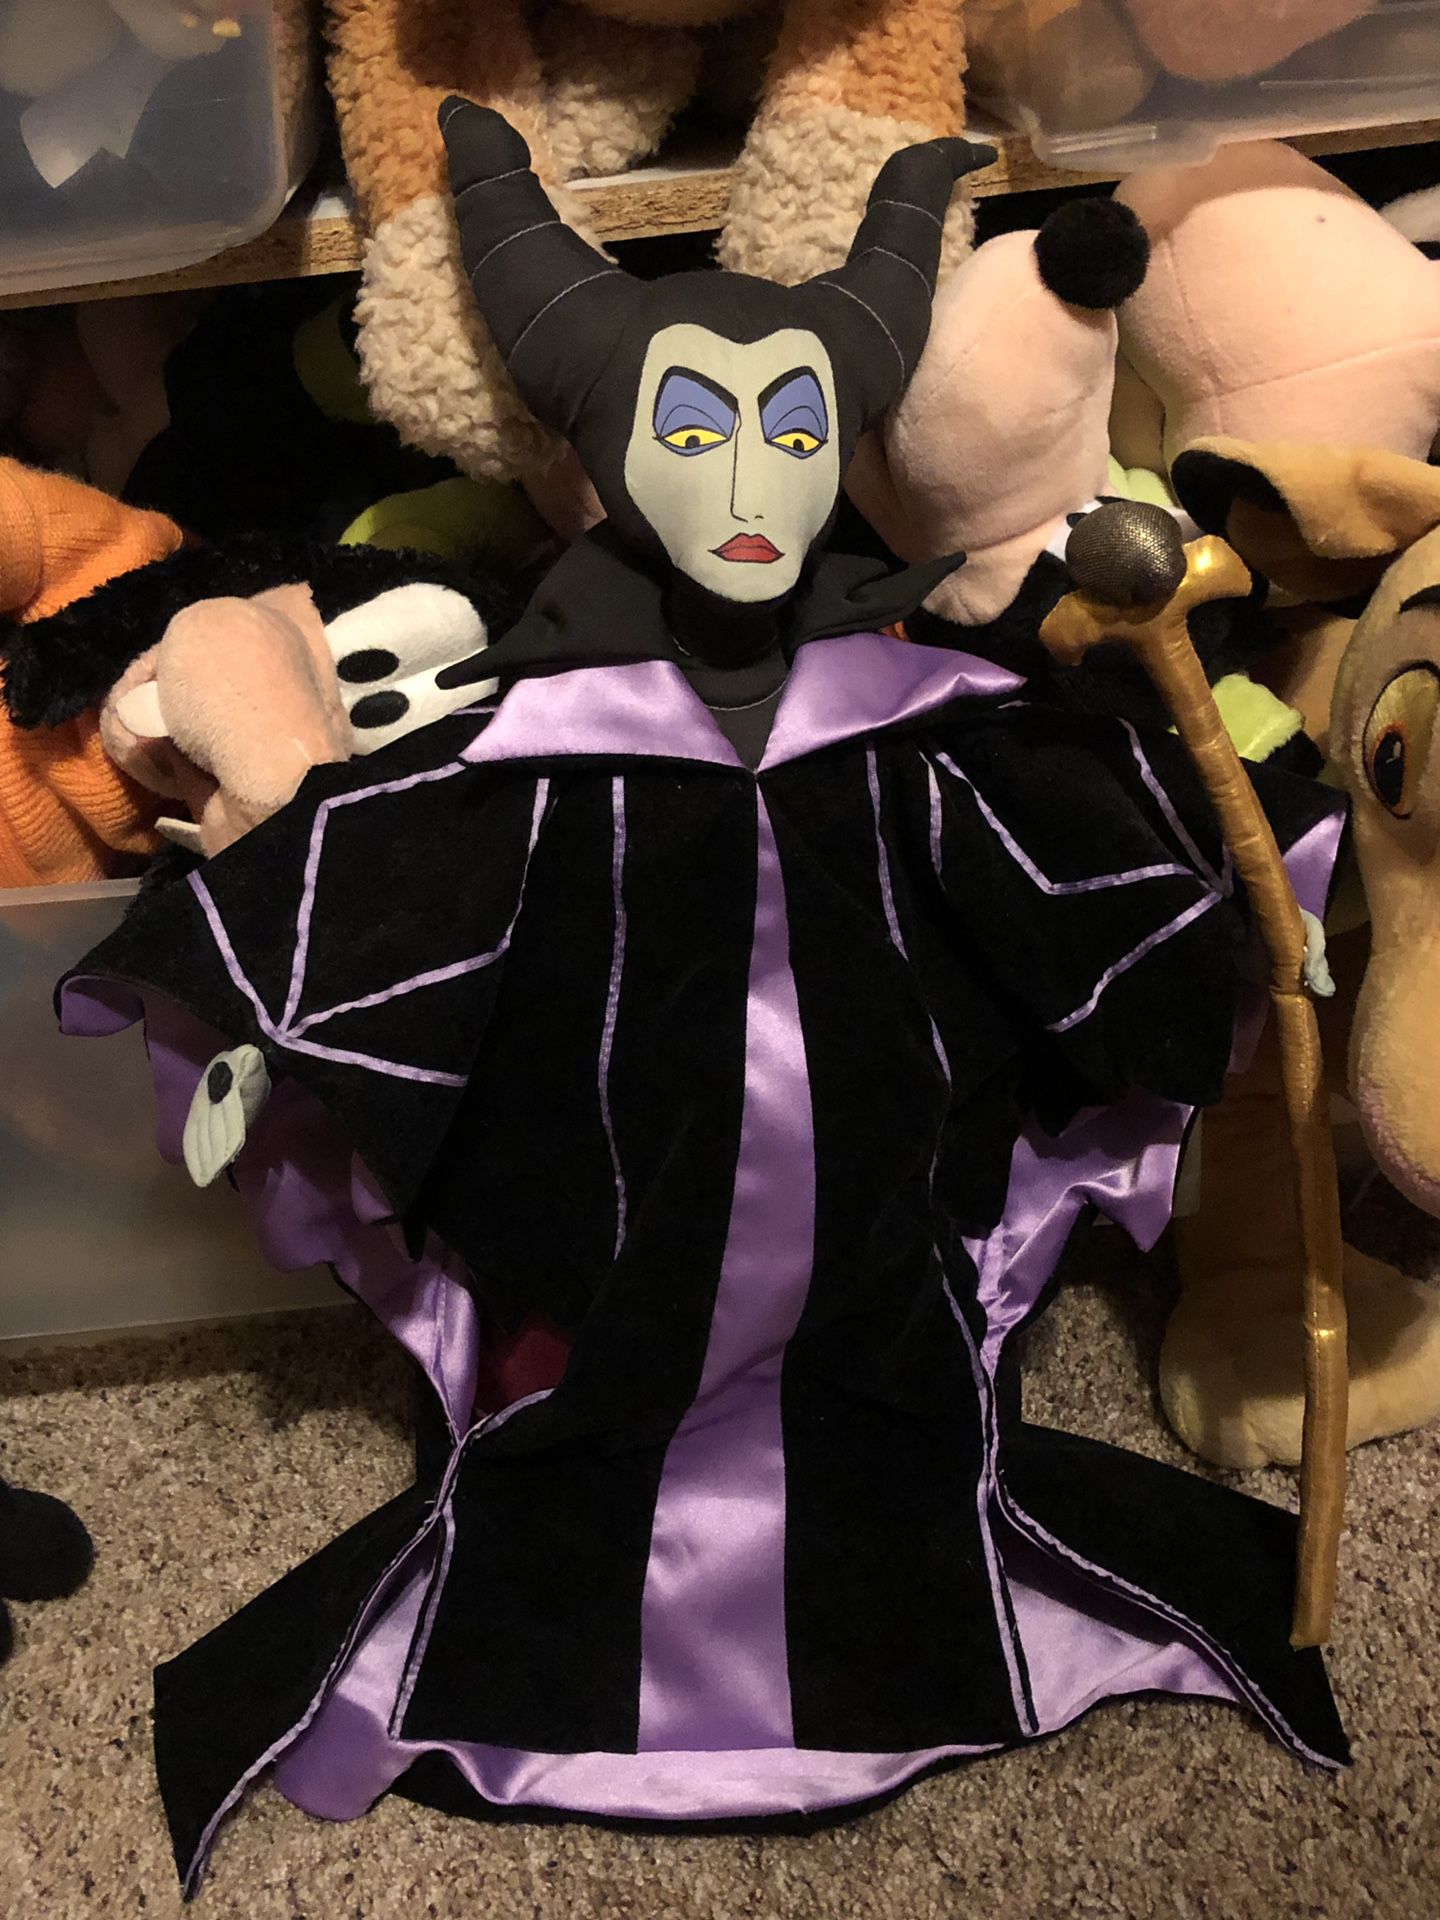 Maleficent Sleeping Beauty Disney Collector Stuffed Animal plush Doll toy 20” tall! Wow!! Sells on line for $79!